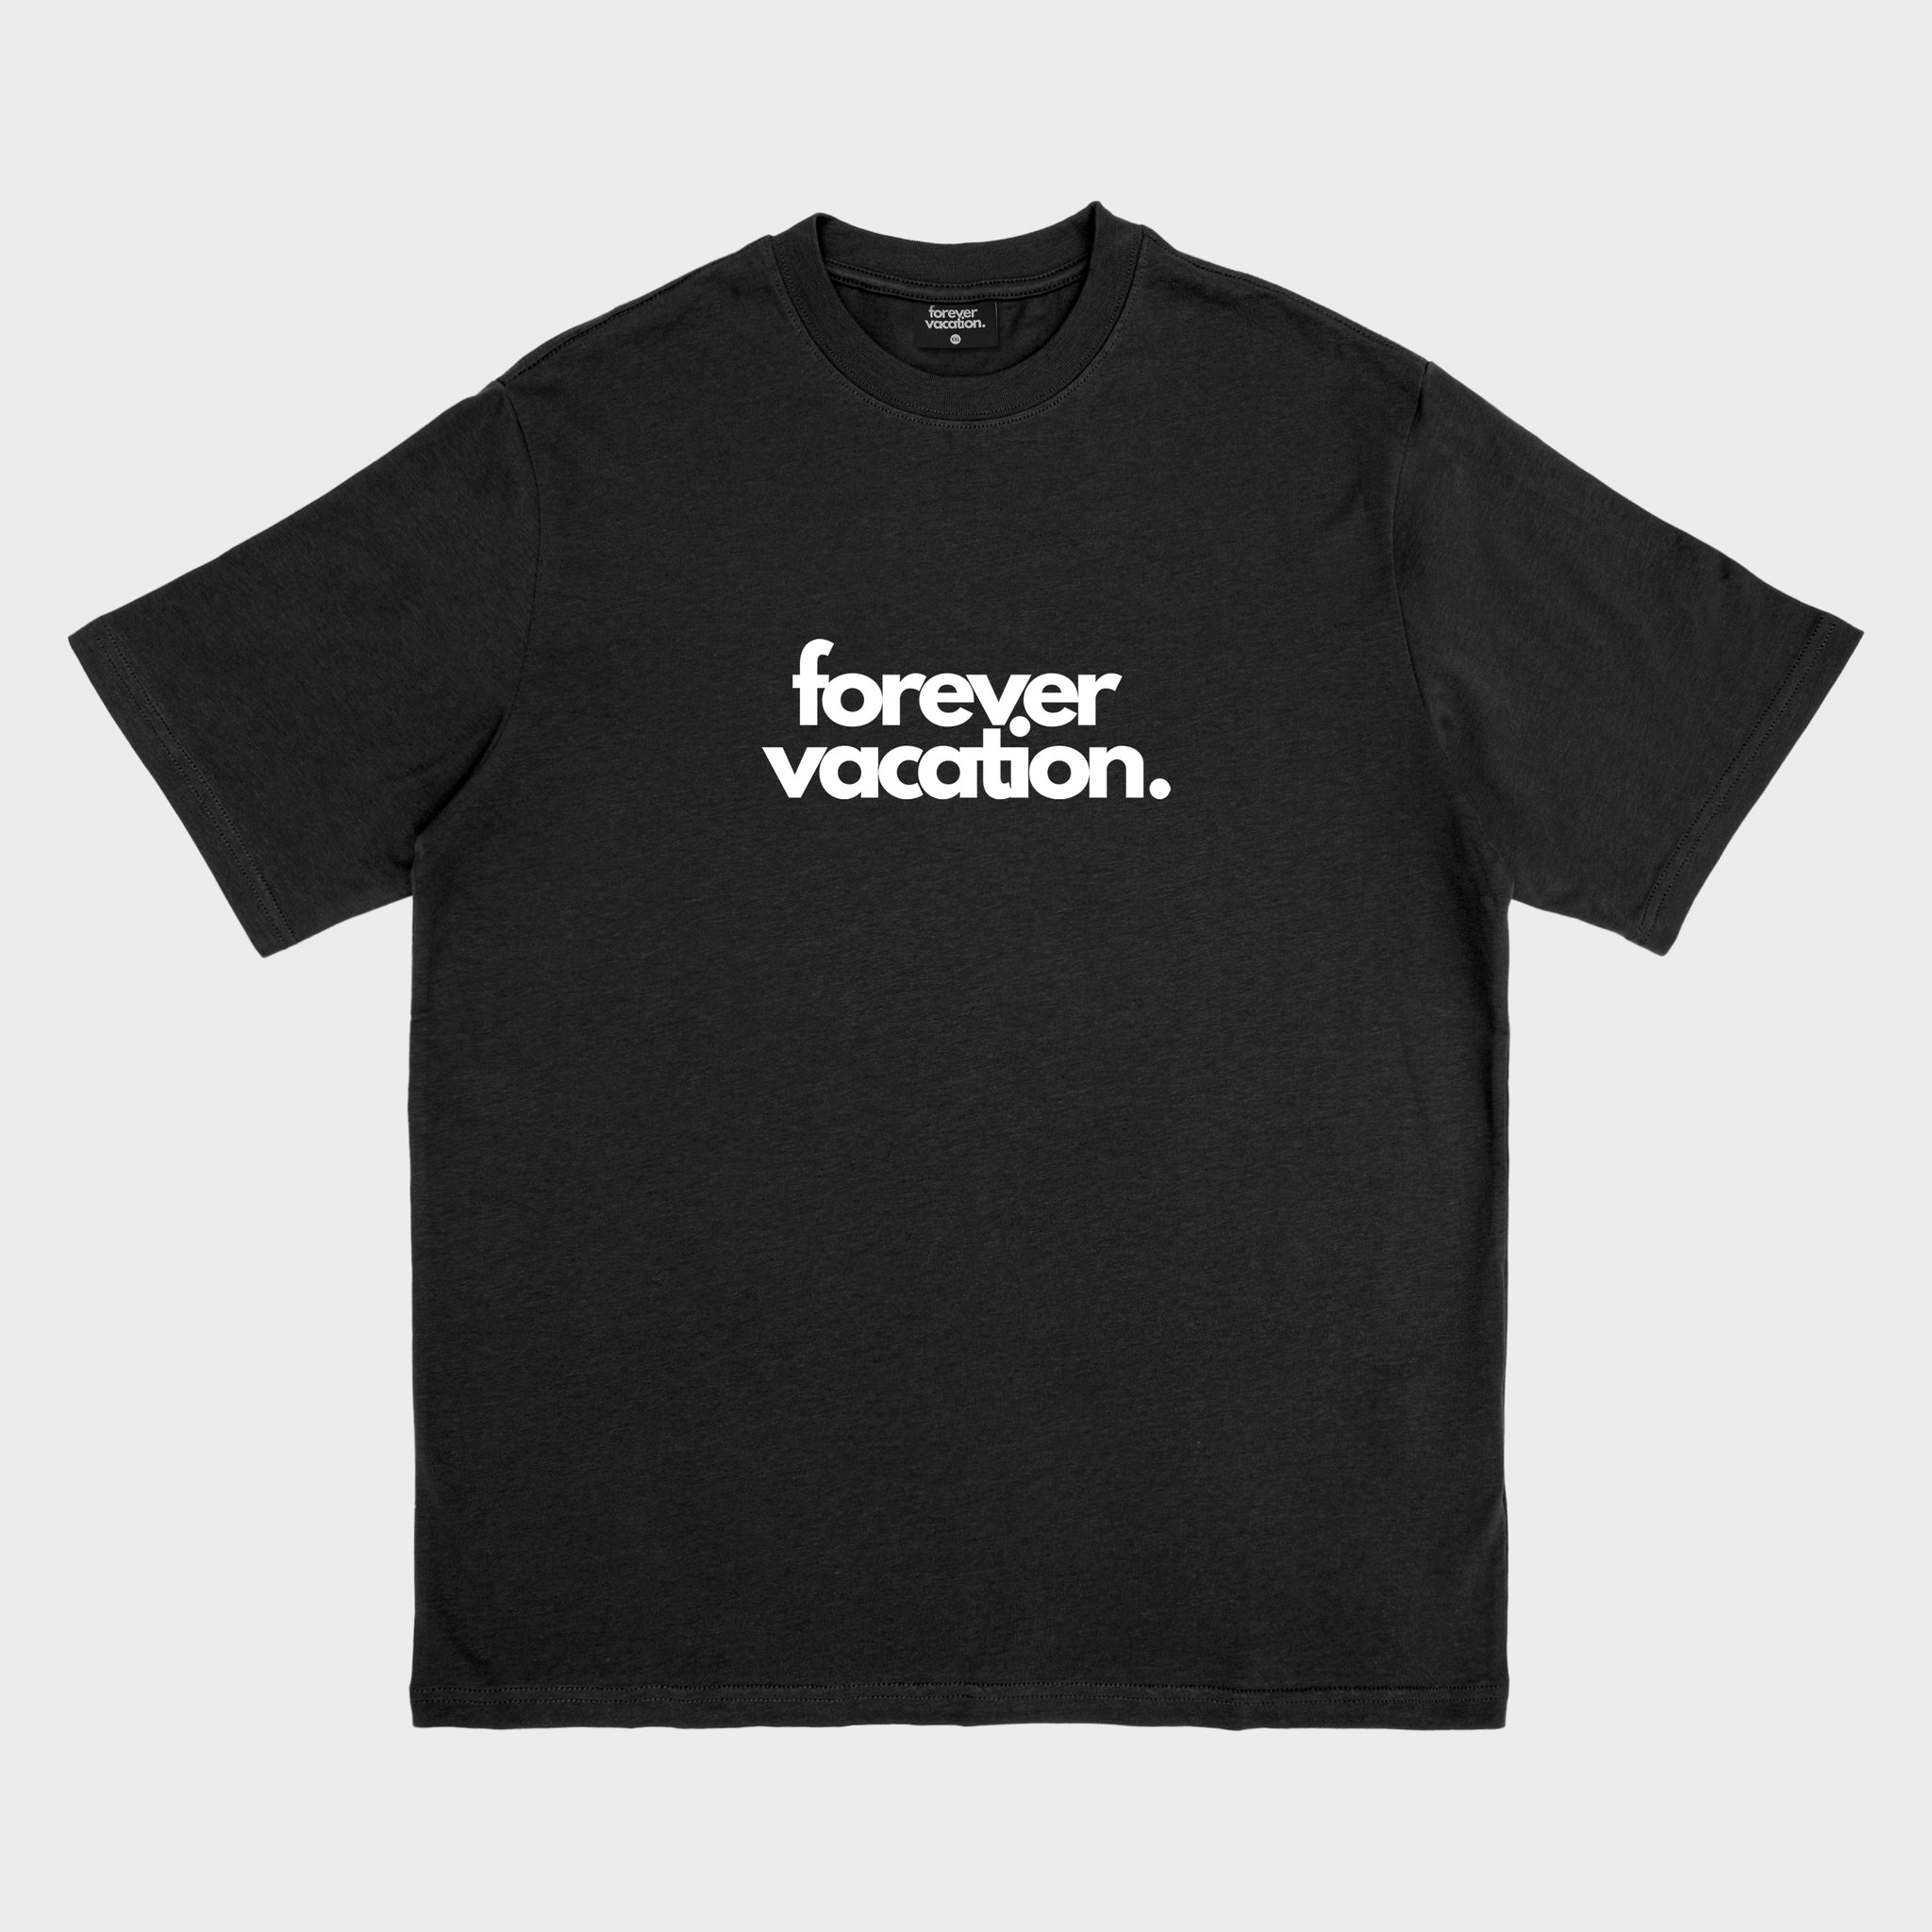 FOREVER VACATION LOGO T-SHIRT